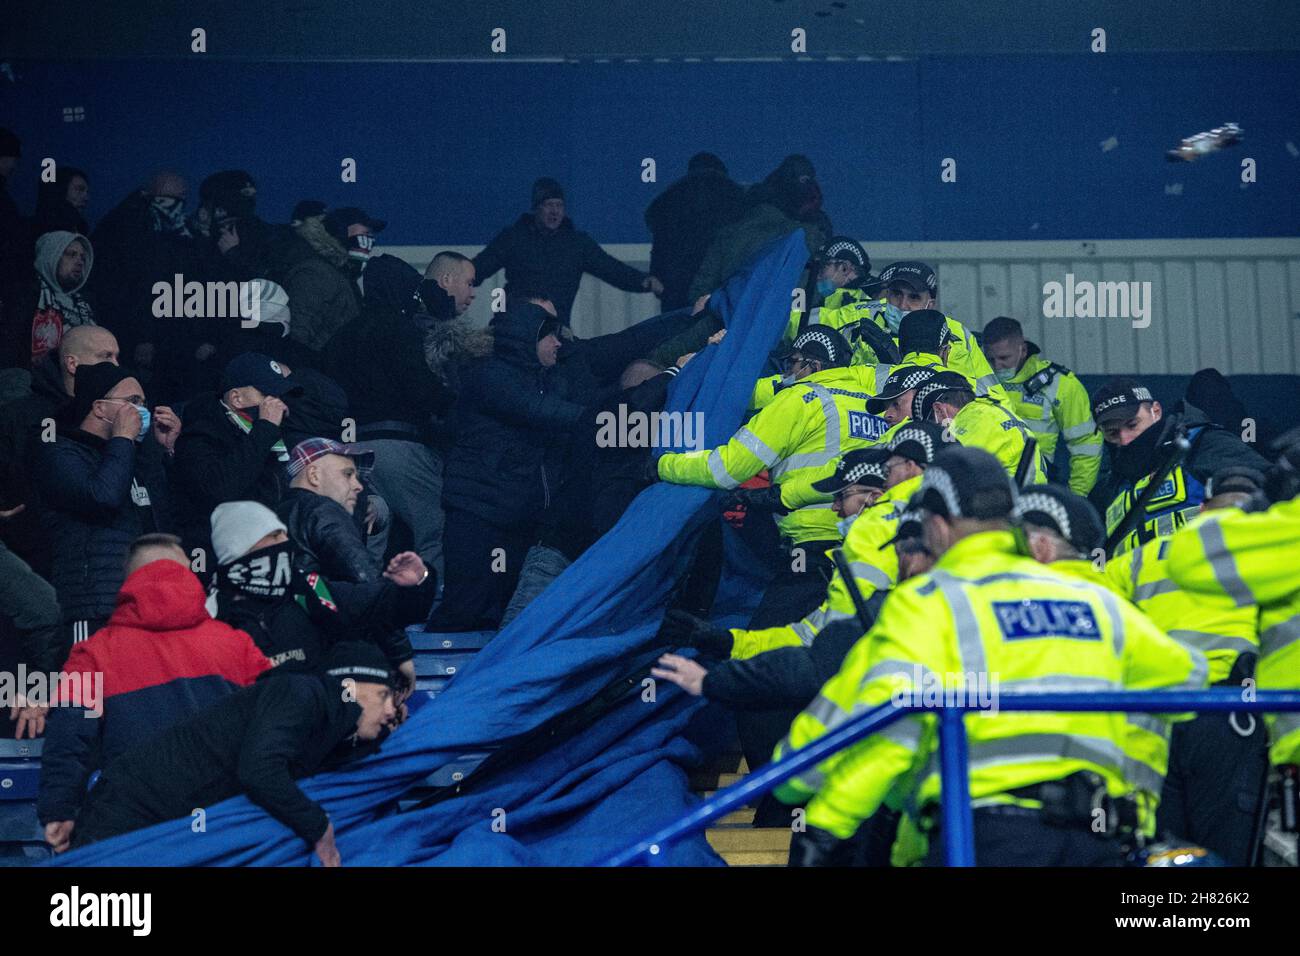 LEICESTER, ENGLAND - NOVEMBER 25: Legia Warszawa fans clash with police during the UEFA Europa League group C match between Leicester City and Legia W Stock Photo